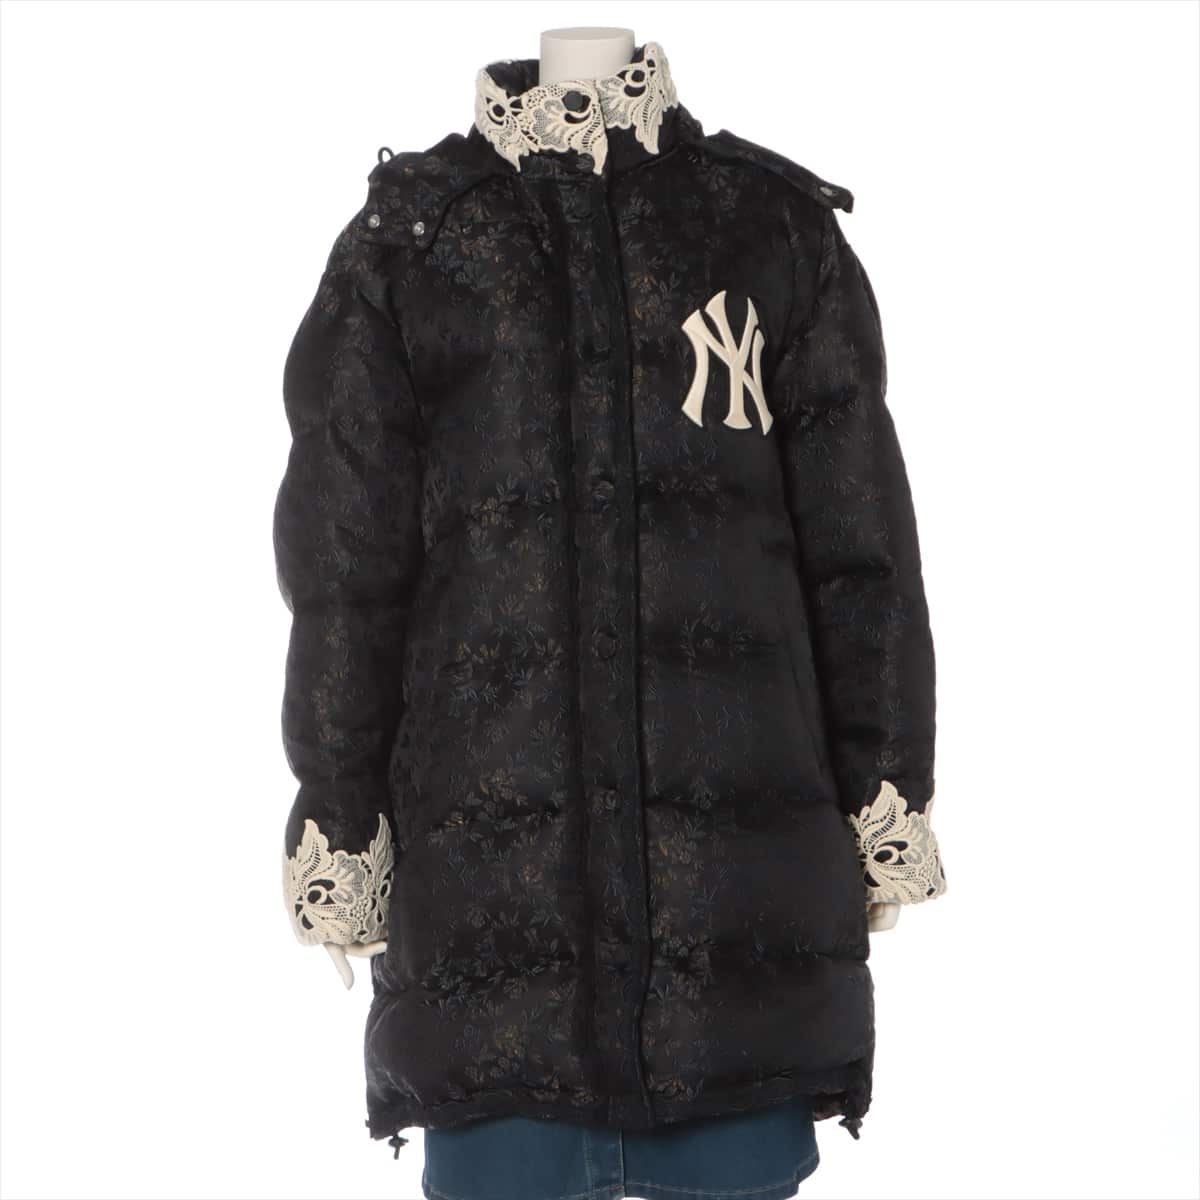 Gucci Acetate Down coat 36 Ladies' Black  NY Yankees embroidery